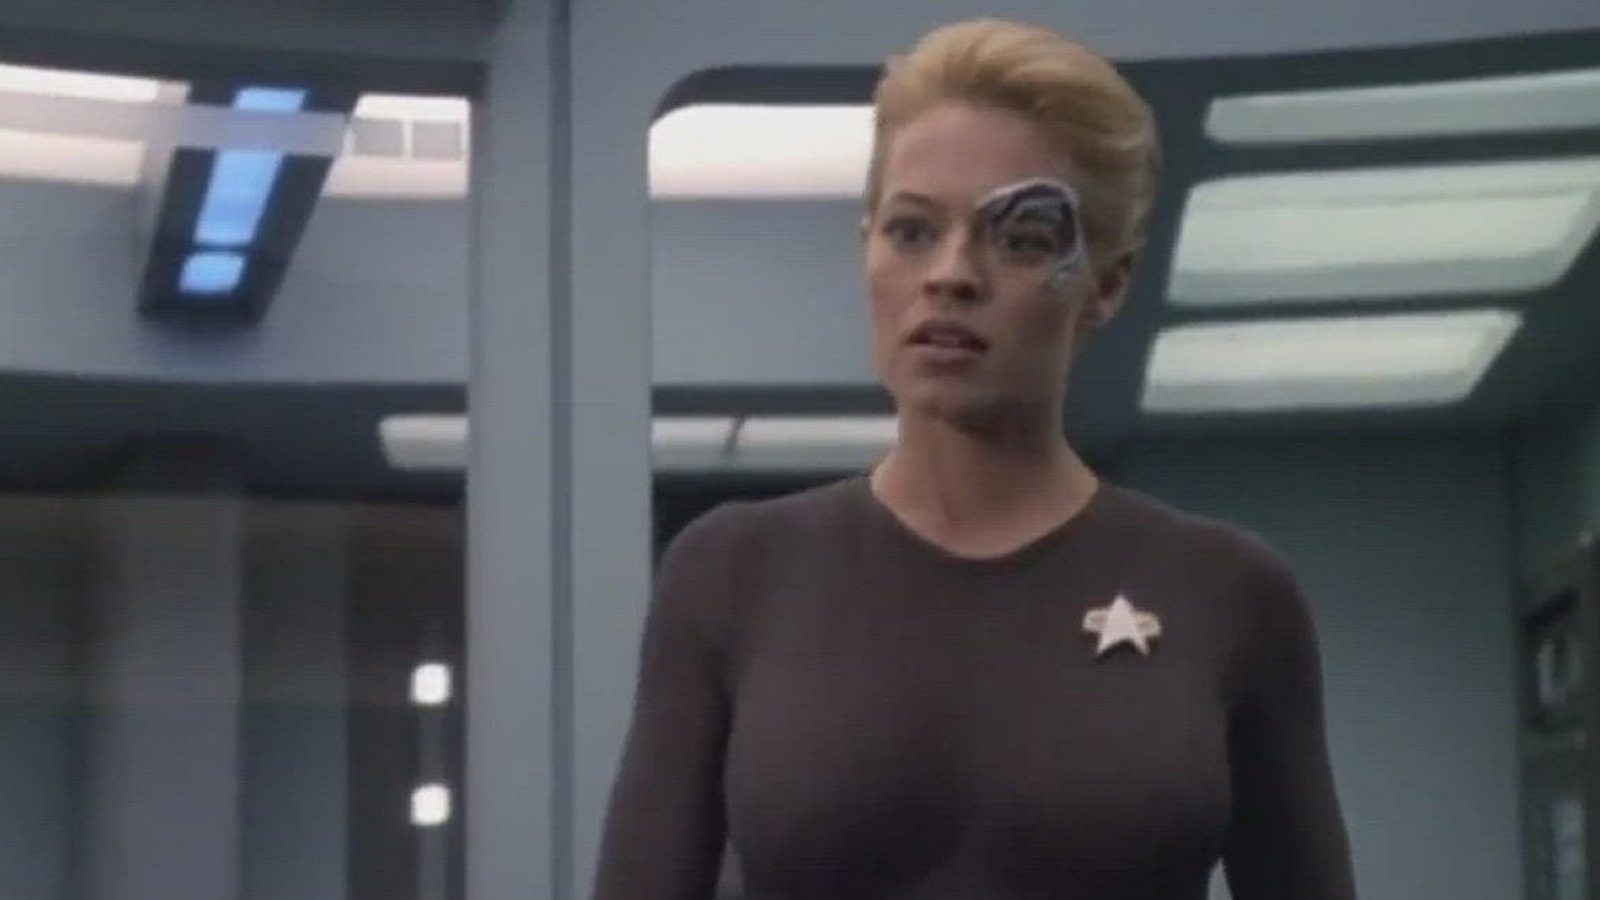 deejay platnum recommends seven of nine images pic